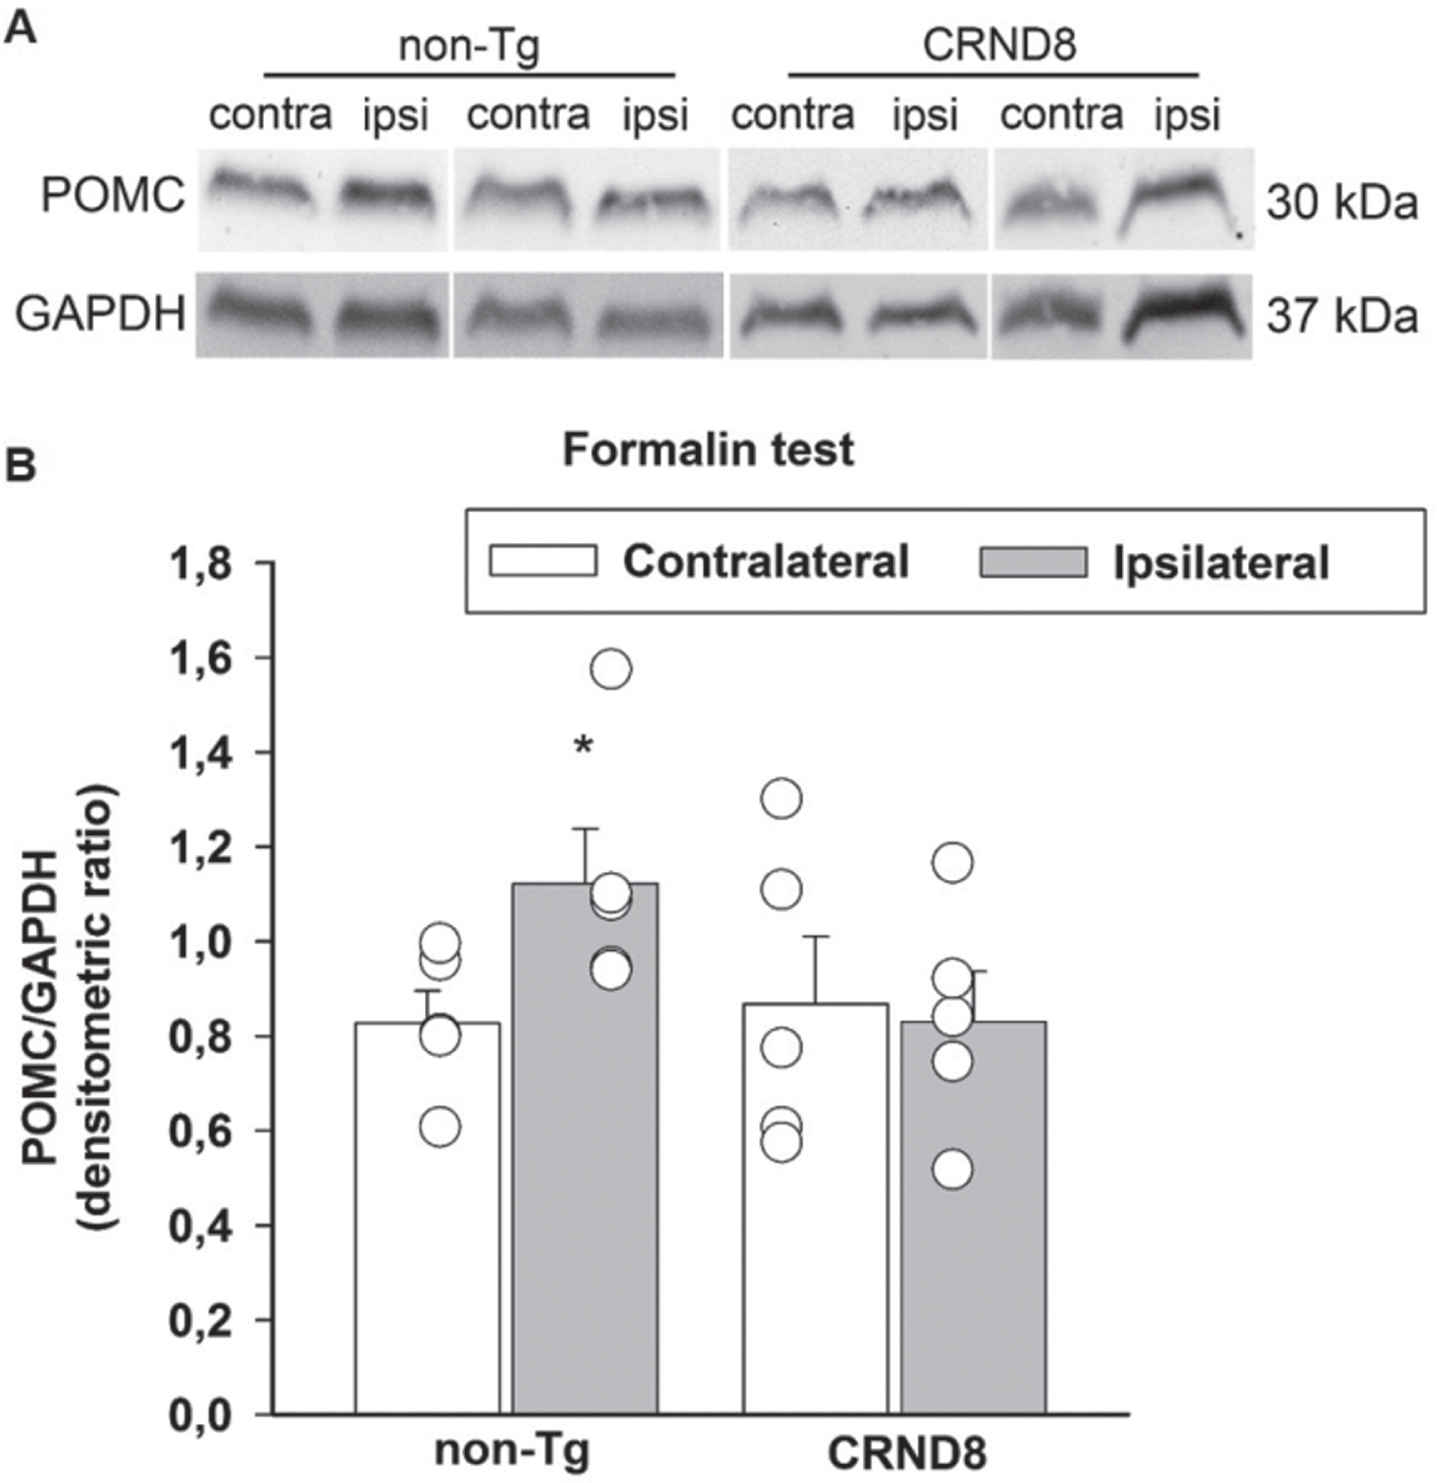 Formalin injection induced the expression of POMC in the spinal cord of non-Tg mice but not CRND8 mice. Representative western blot image of pro-opiomelanocortin (POMC) expression in lumbar specimens 60 min after formalin injection (A). Two animals per genotype, and the corresponding protein samples obtained from the contralateral (contra) and ipsilateral (ipsi) sites to the formalin injection, are shown. The GAPDH band is shown as loading control. Densitometric values of POMC bands from five different animals per genotype, normalized against GAPDH, are presented in bar graphs showing individual values (B). Values represent the mean±SEM. A two-way ANOVA with Bonferroni post-test for all pairwise multiple comparisons was carried out to analyze the effects of genotype and side on POMC expression. There was a statistically significant difference in POMC expression between the ipsilateral and the contralateral side in non-Tg mice (p = 0.006). No other significant difference was found.